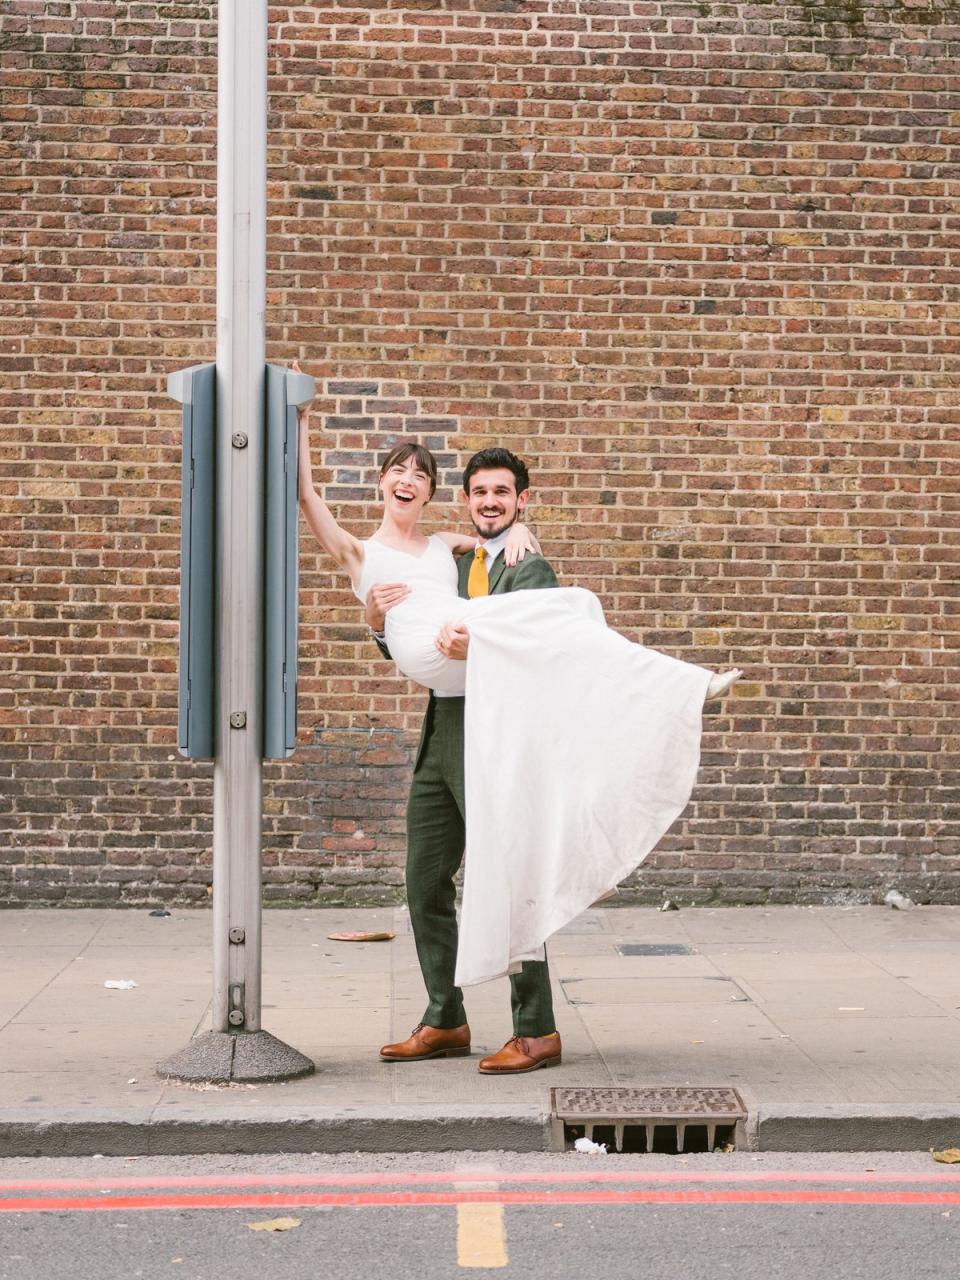 Rory and Charlotte at the bus stop where they met and got engaged (James White)